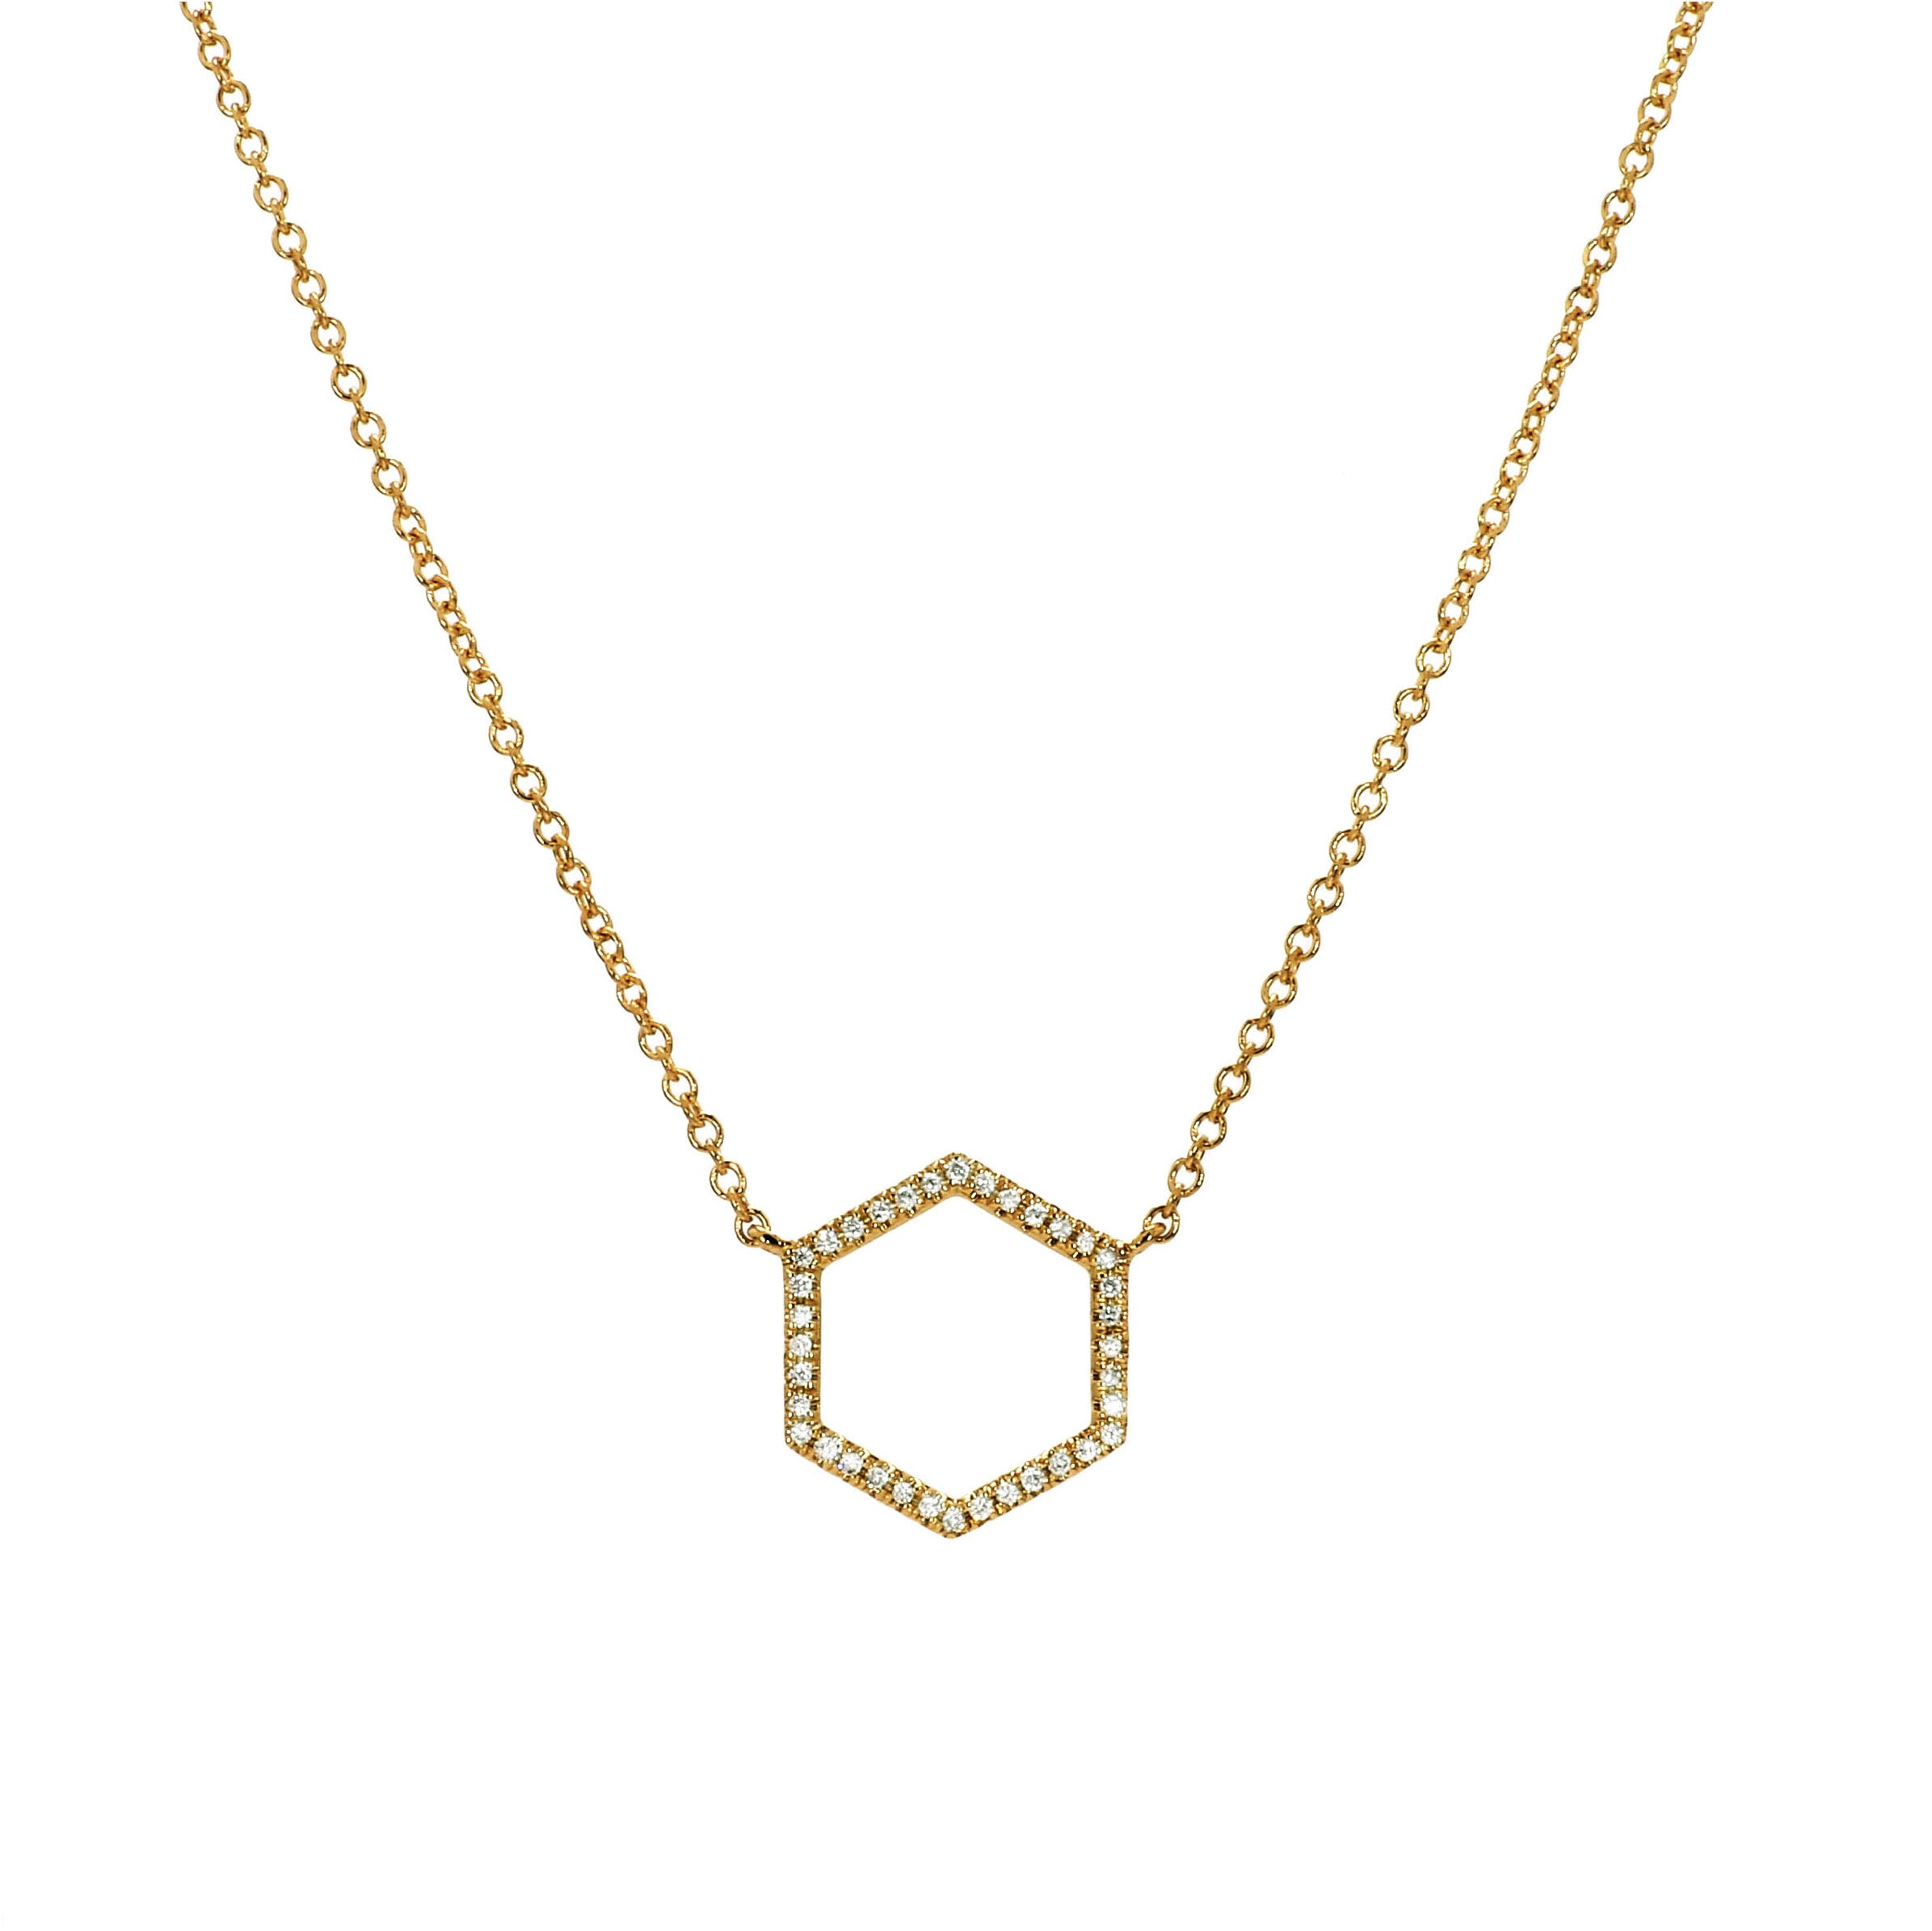 Adamar Jewels LUZ Nube Necklace in 18K yellow gold set with diamonds